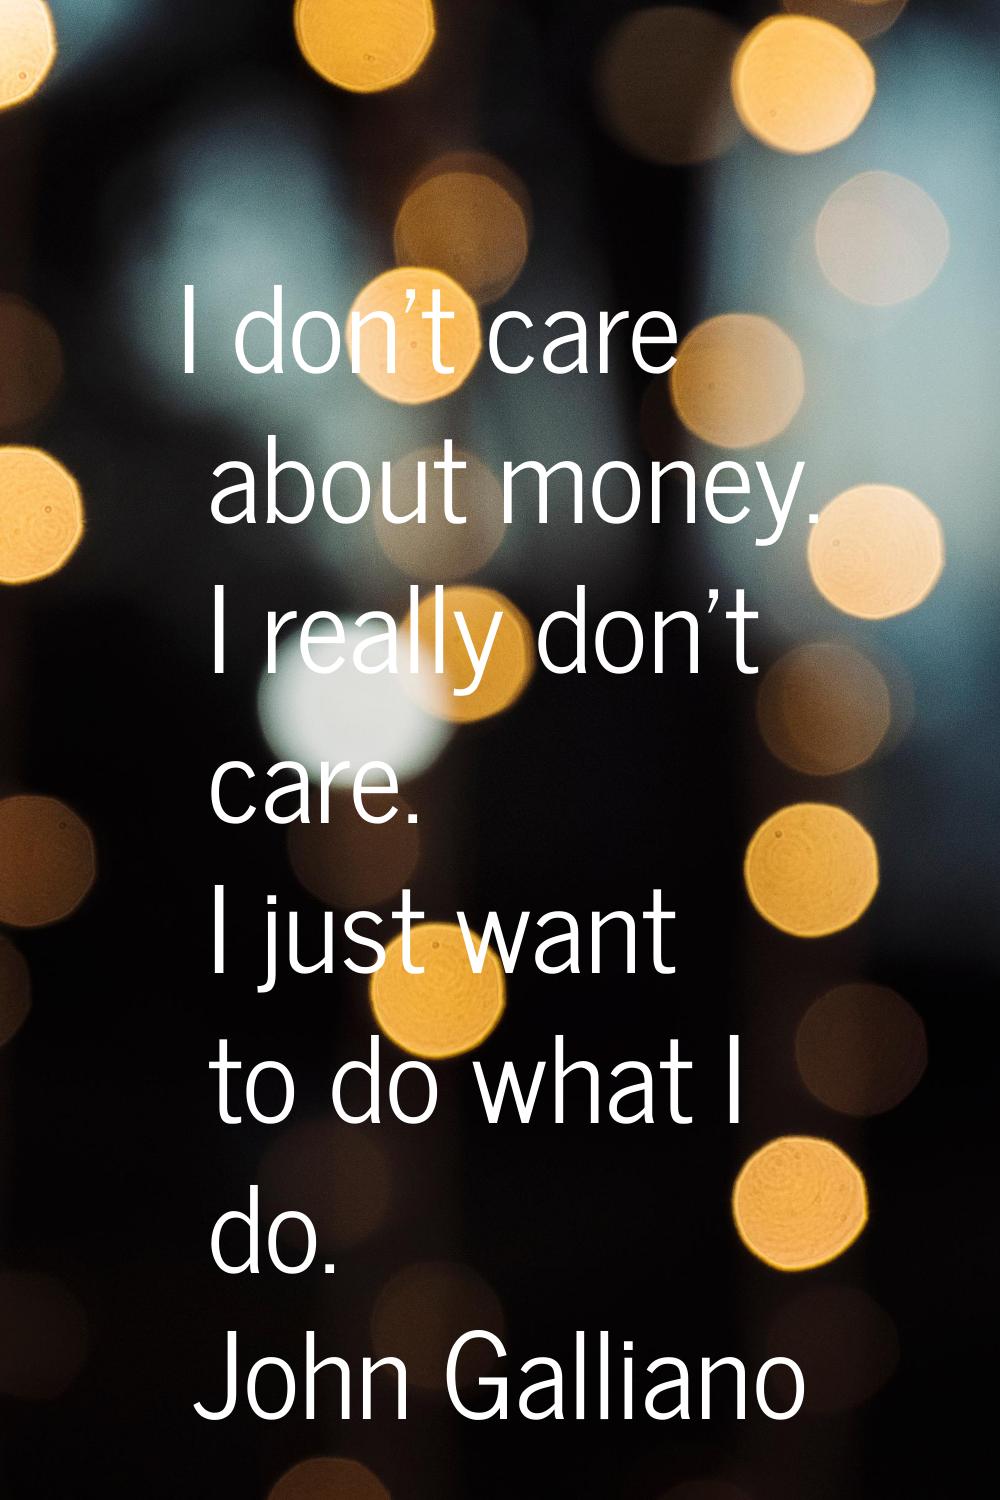 I don't care about money. I really don't care. I just want to do what I do.